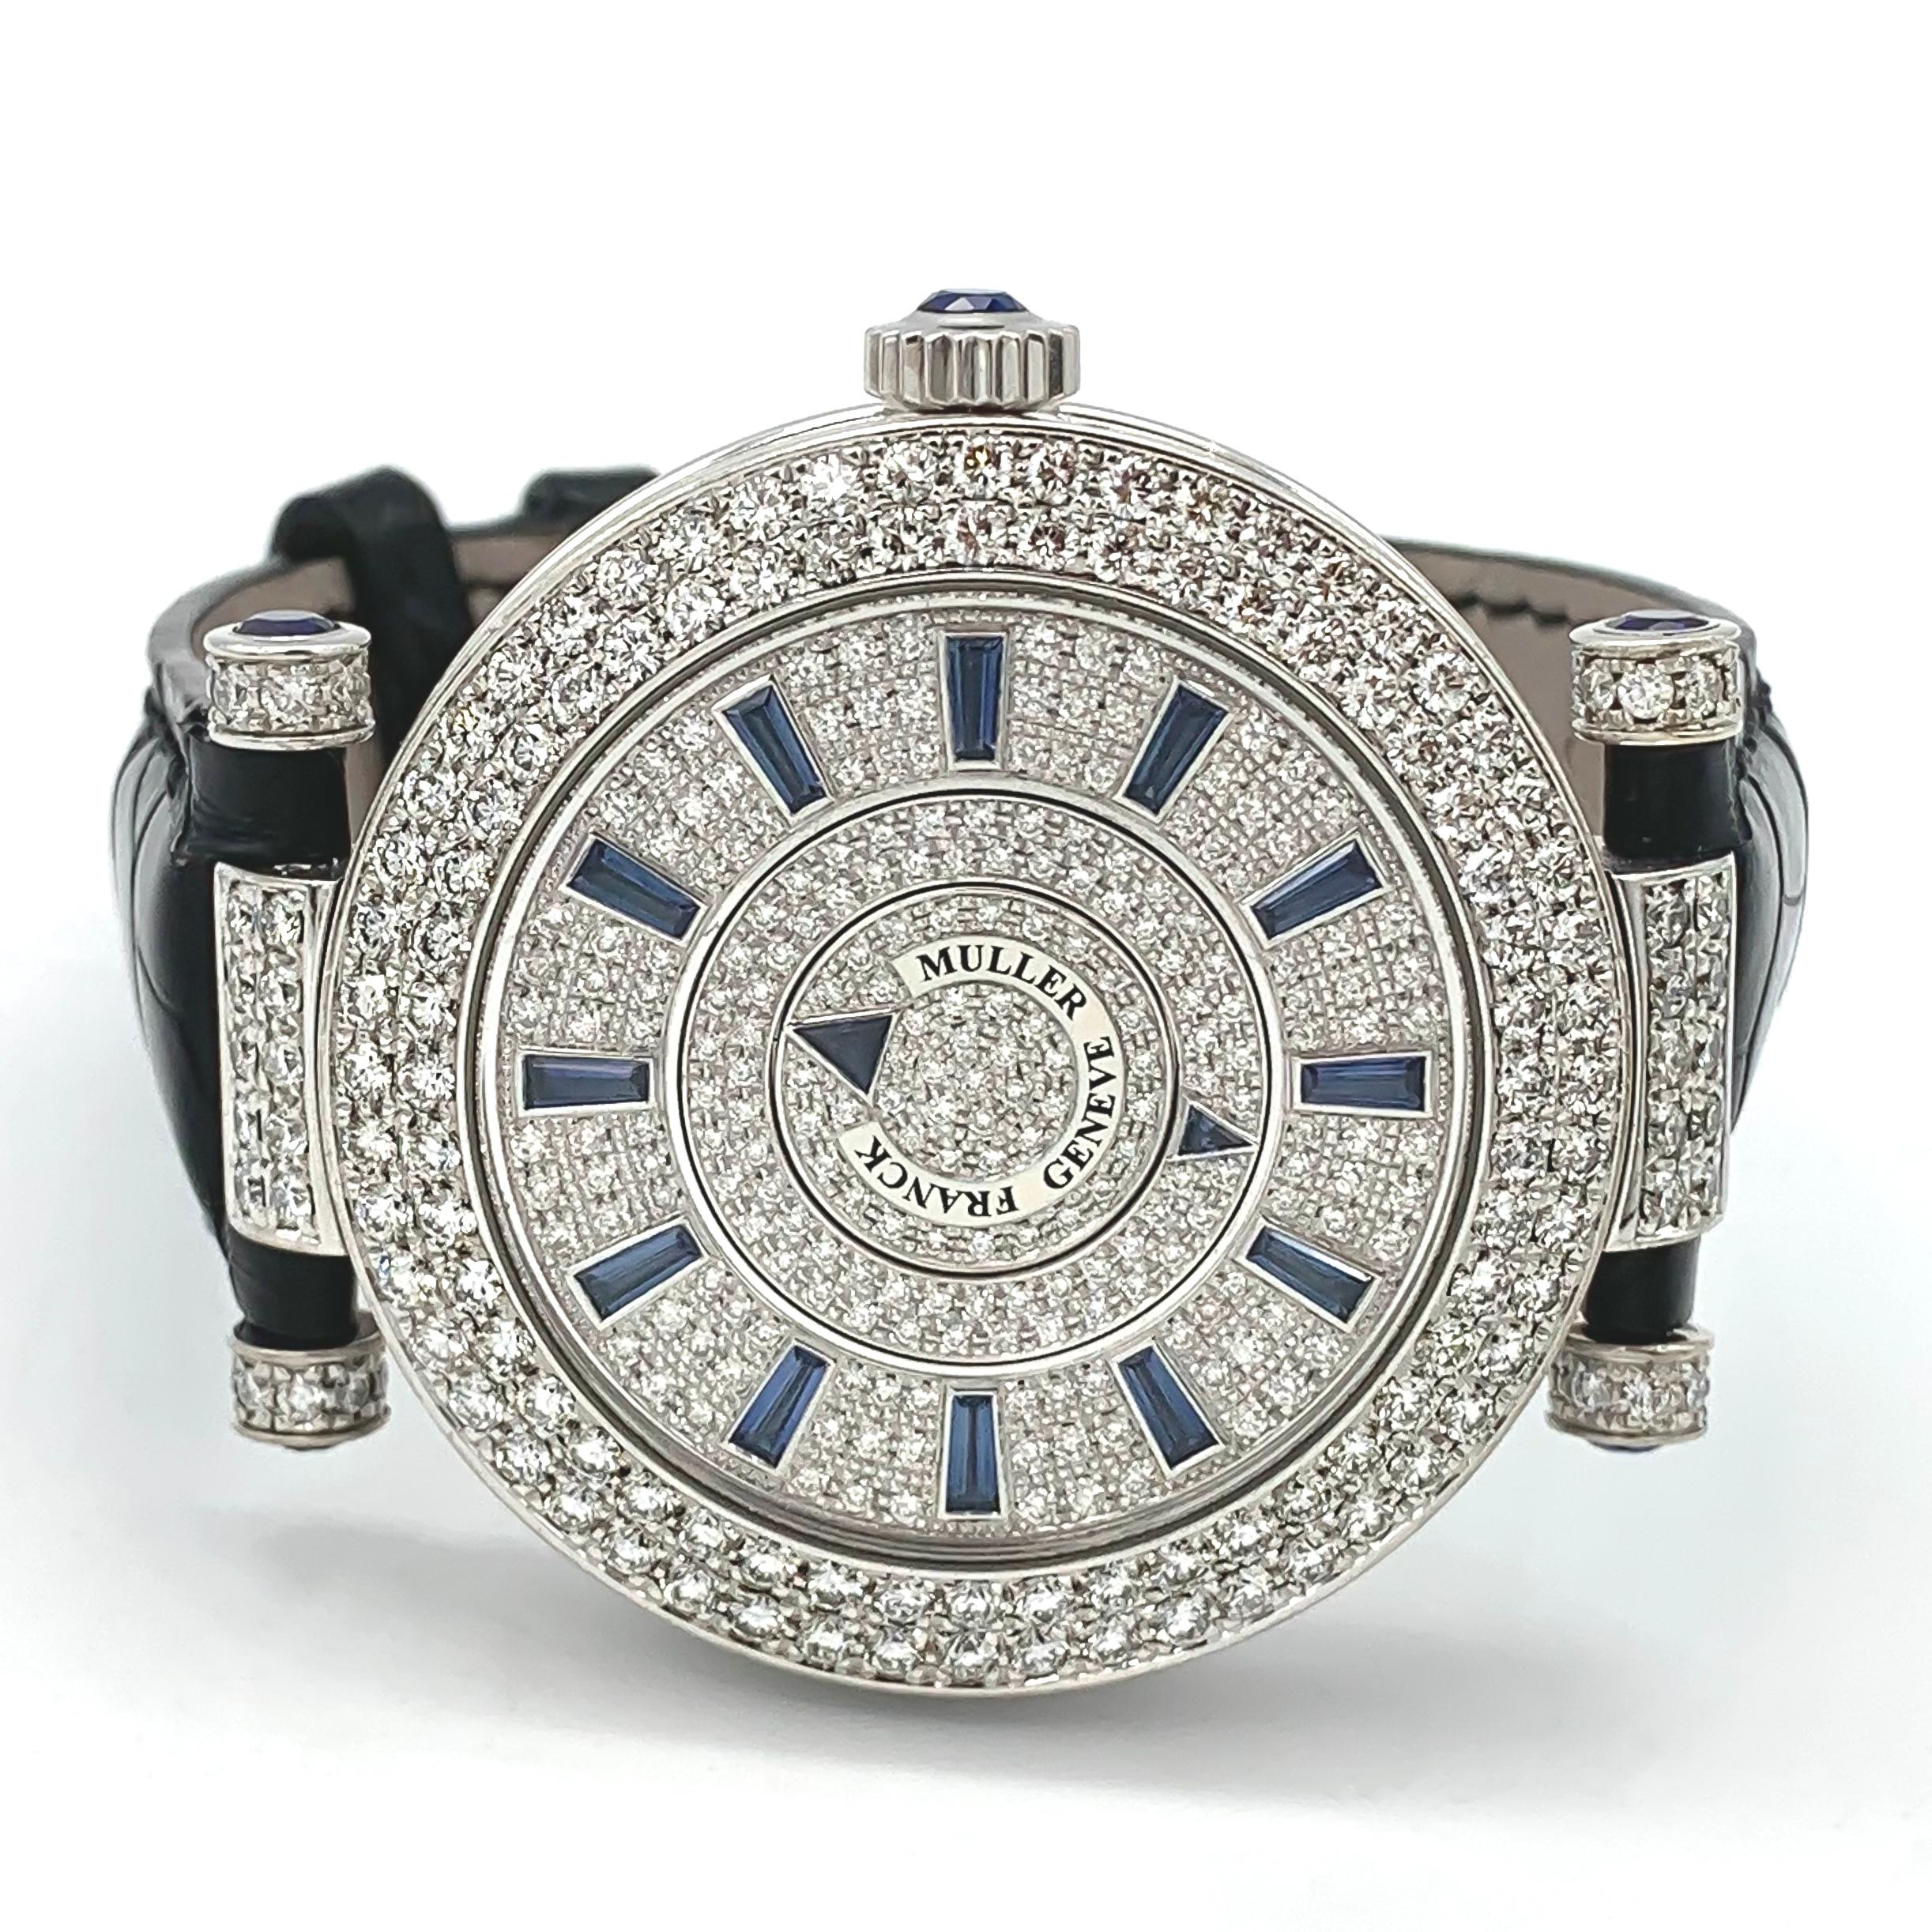 White gold case.
Diameter : 42 mm.
White diamond-paved dial.
A scratch resistant sapphire crystal protects the dial.
This timepiece indicates hours and minutes via two rotating discs on the diamond-paved dial with sapphire indexes.
Water resistance